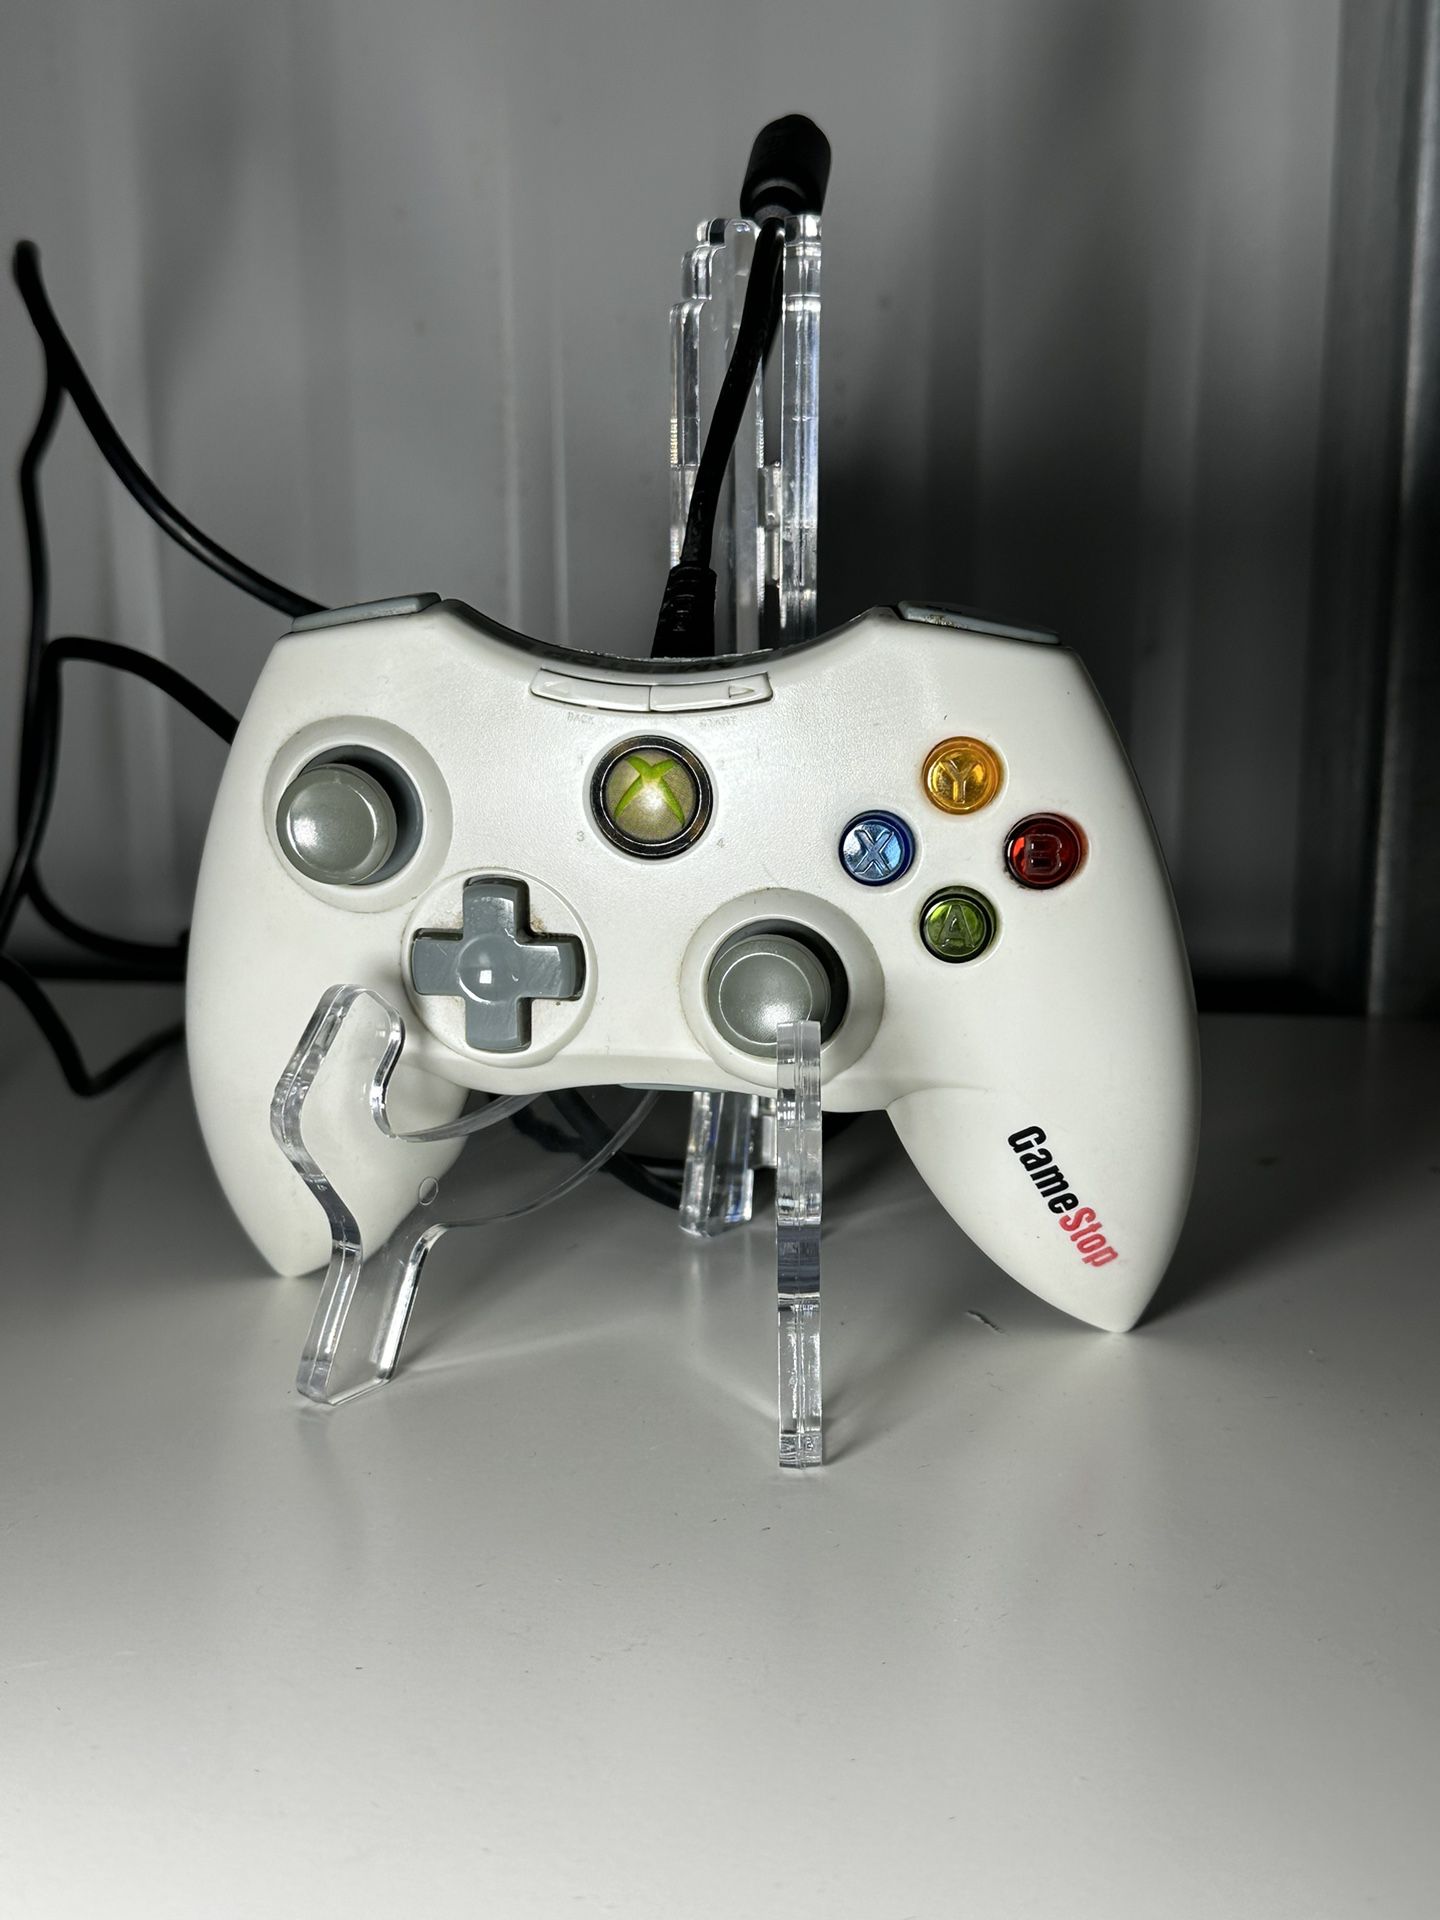 Gamestop Mad Catz Xbox 360 Wired Controller Game Pad 47161 White with Breakaway